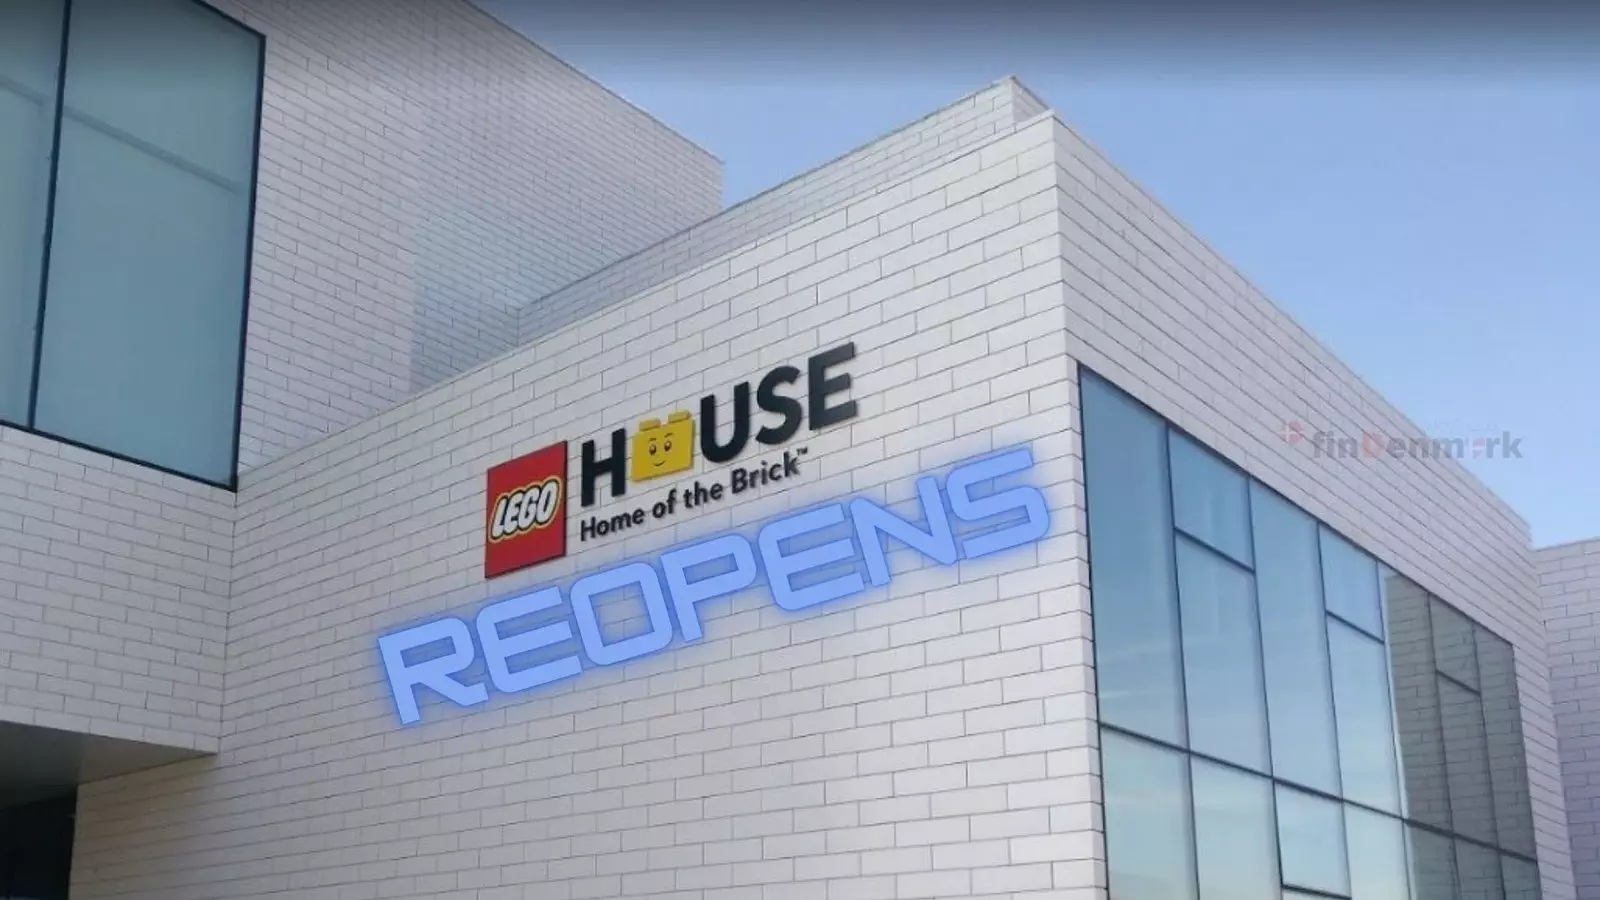 HOME OF THE BRICK – LEGO HOUSE REOPENS 23rd APRIL